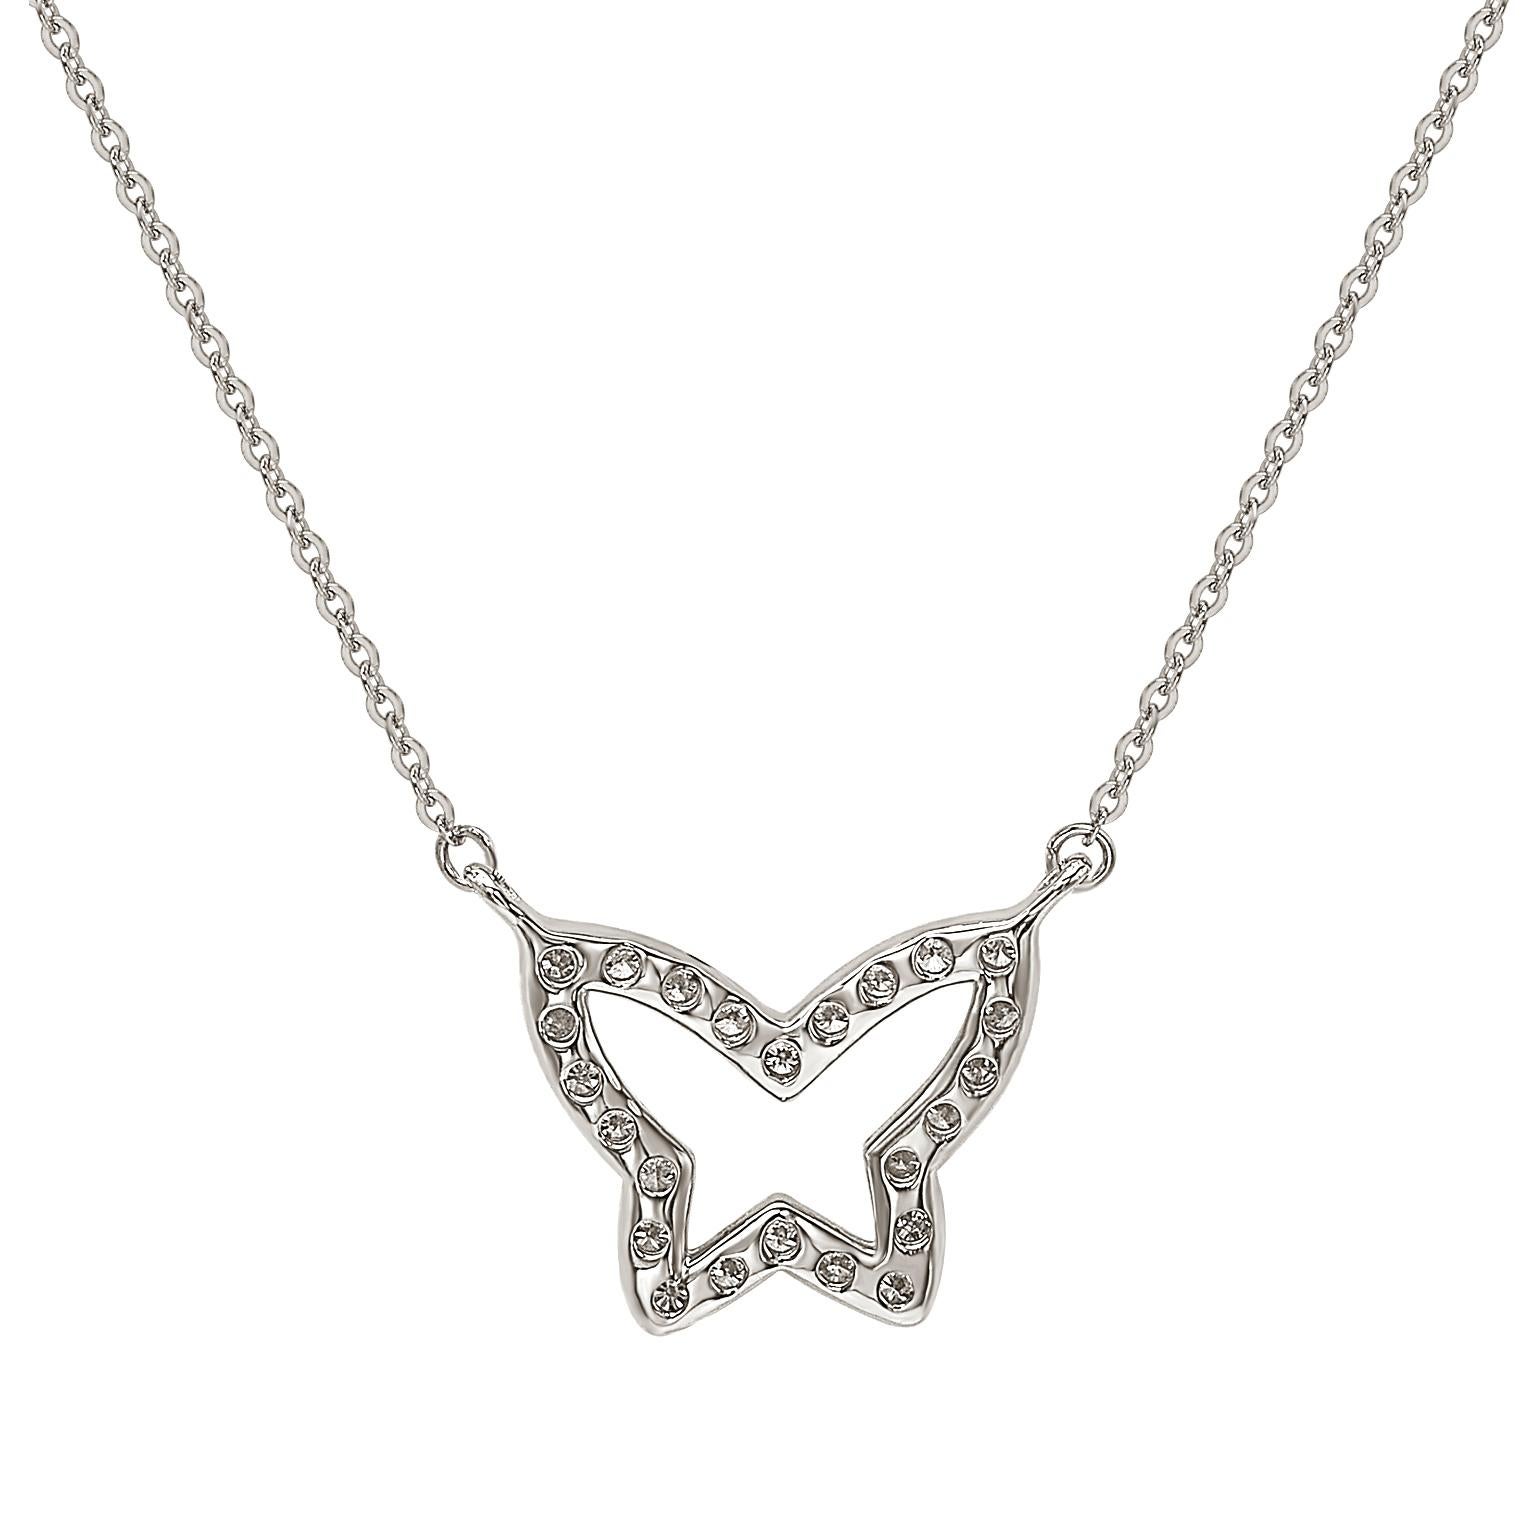 This breathtaking Suzy Levian butterfly necklace features natural diamonds, hand-set in 14-Karat white gold. It's the perfect gift to let someone special know you're thinking of them. Each butterfly necklace features a single row of pave natural